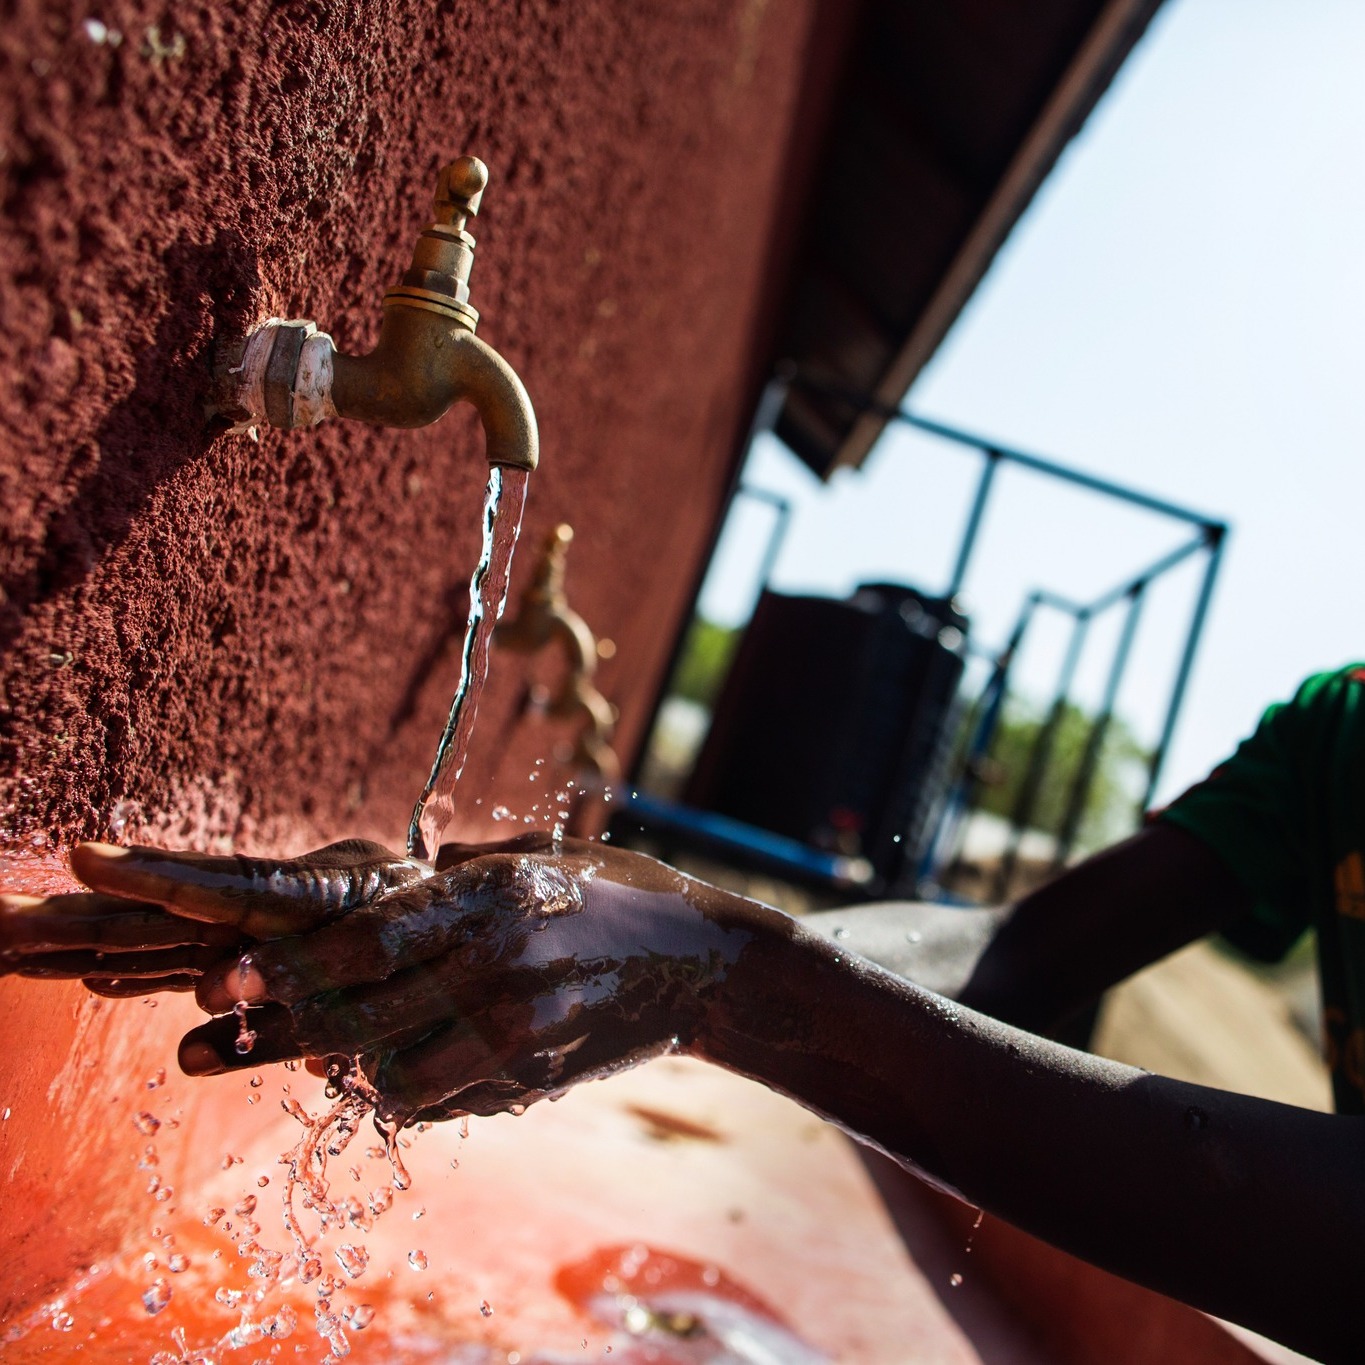 100,000 Juba residents to access safe drinking water, thanks to UNICEF, Germany